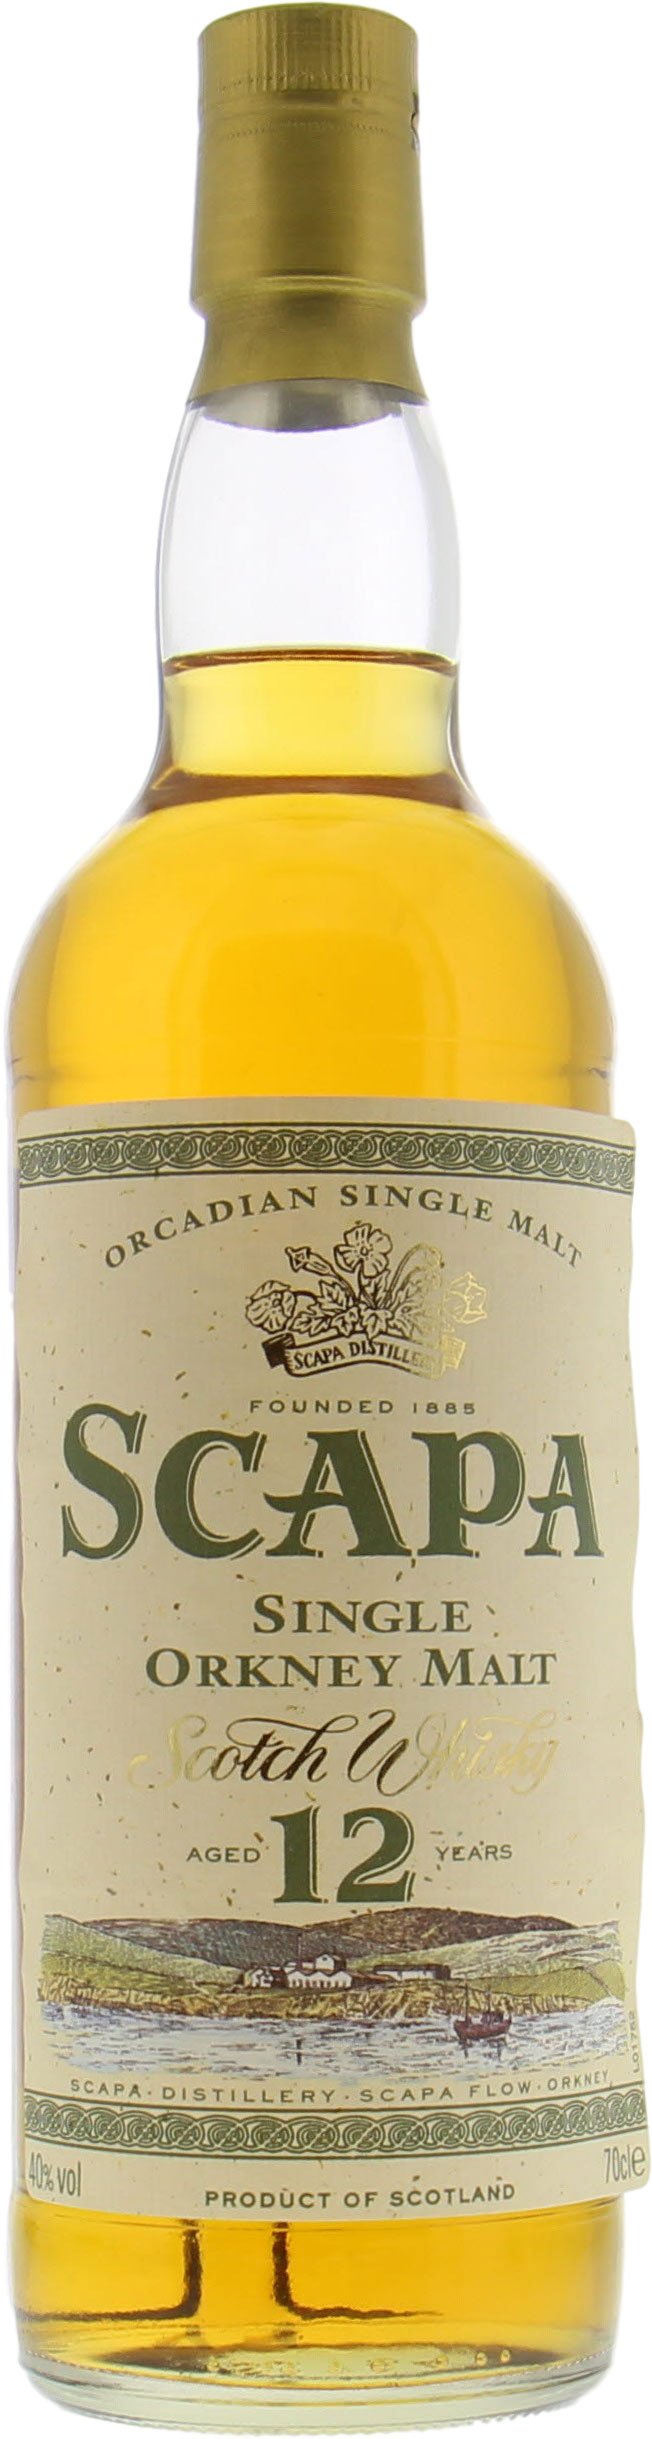 Scapa - 12 Years Old Vintage Bottle 40% NV No Original Box Included!